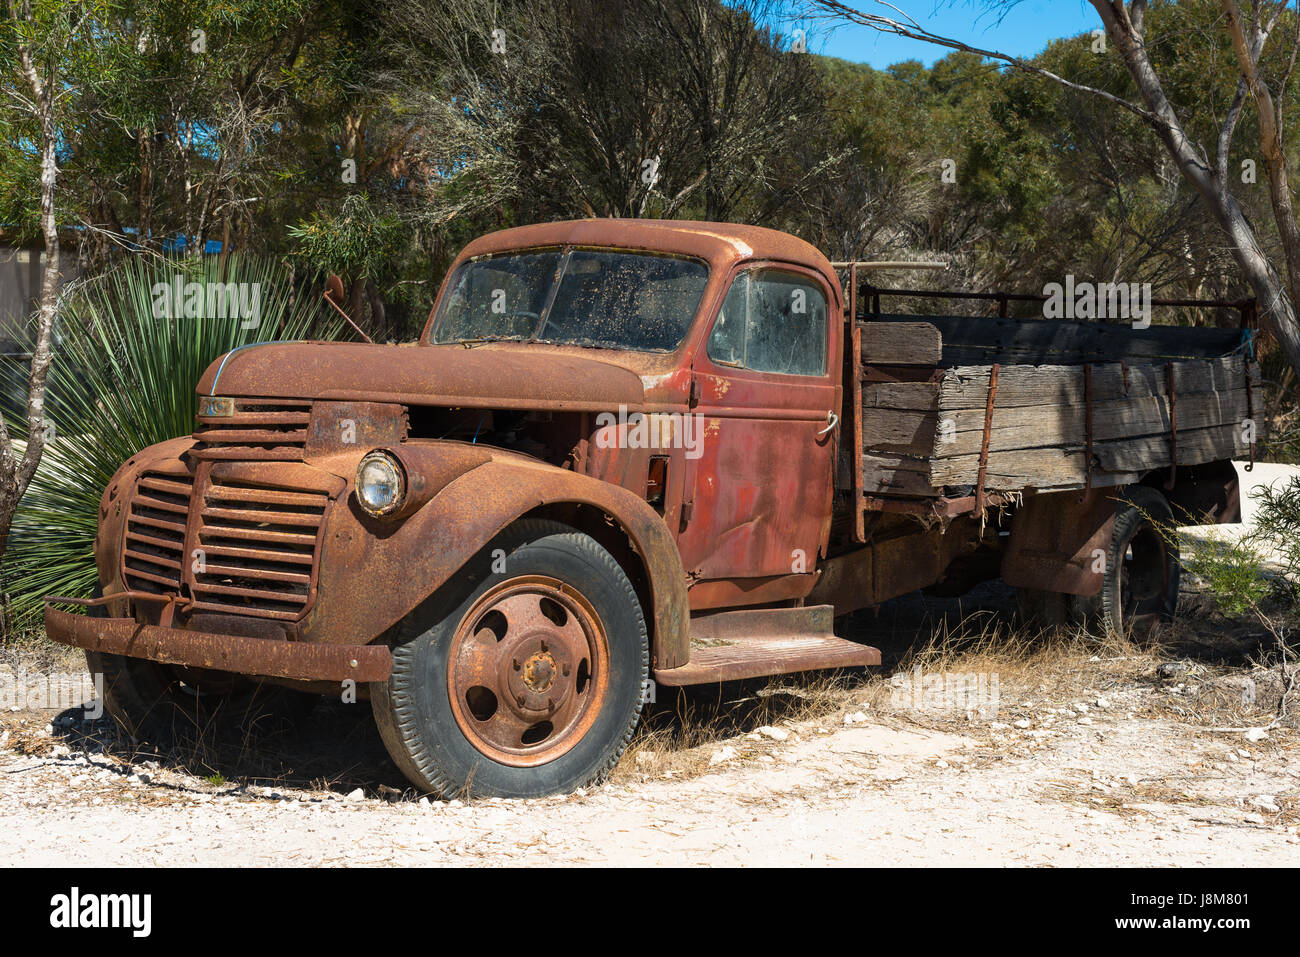 Rusty old truck in outback Australia. Northern Territory. Stock Photo